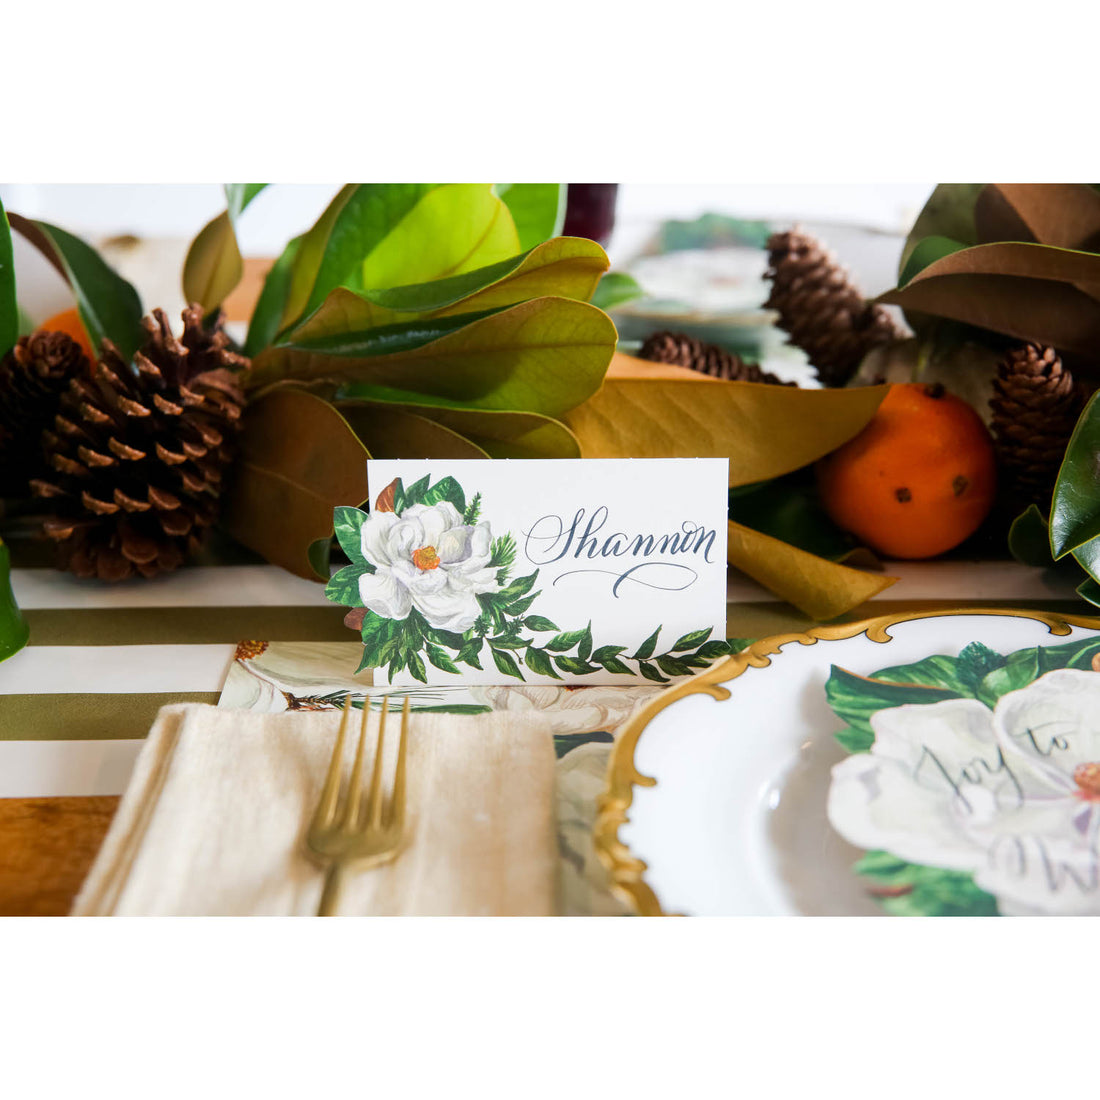 Hand drawn Hester &amp; Cook magnolia place cards for a Thanksgiving table.